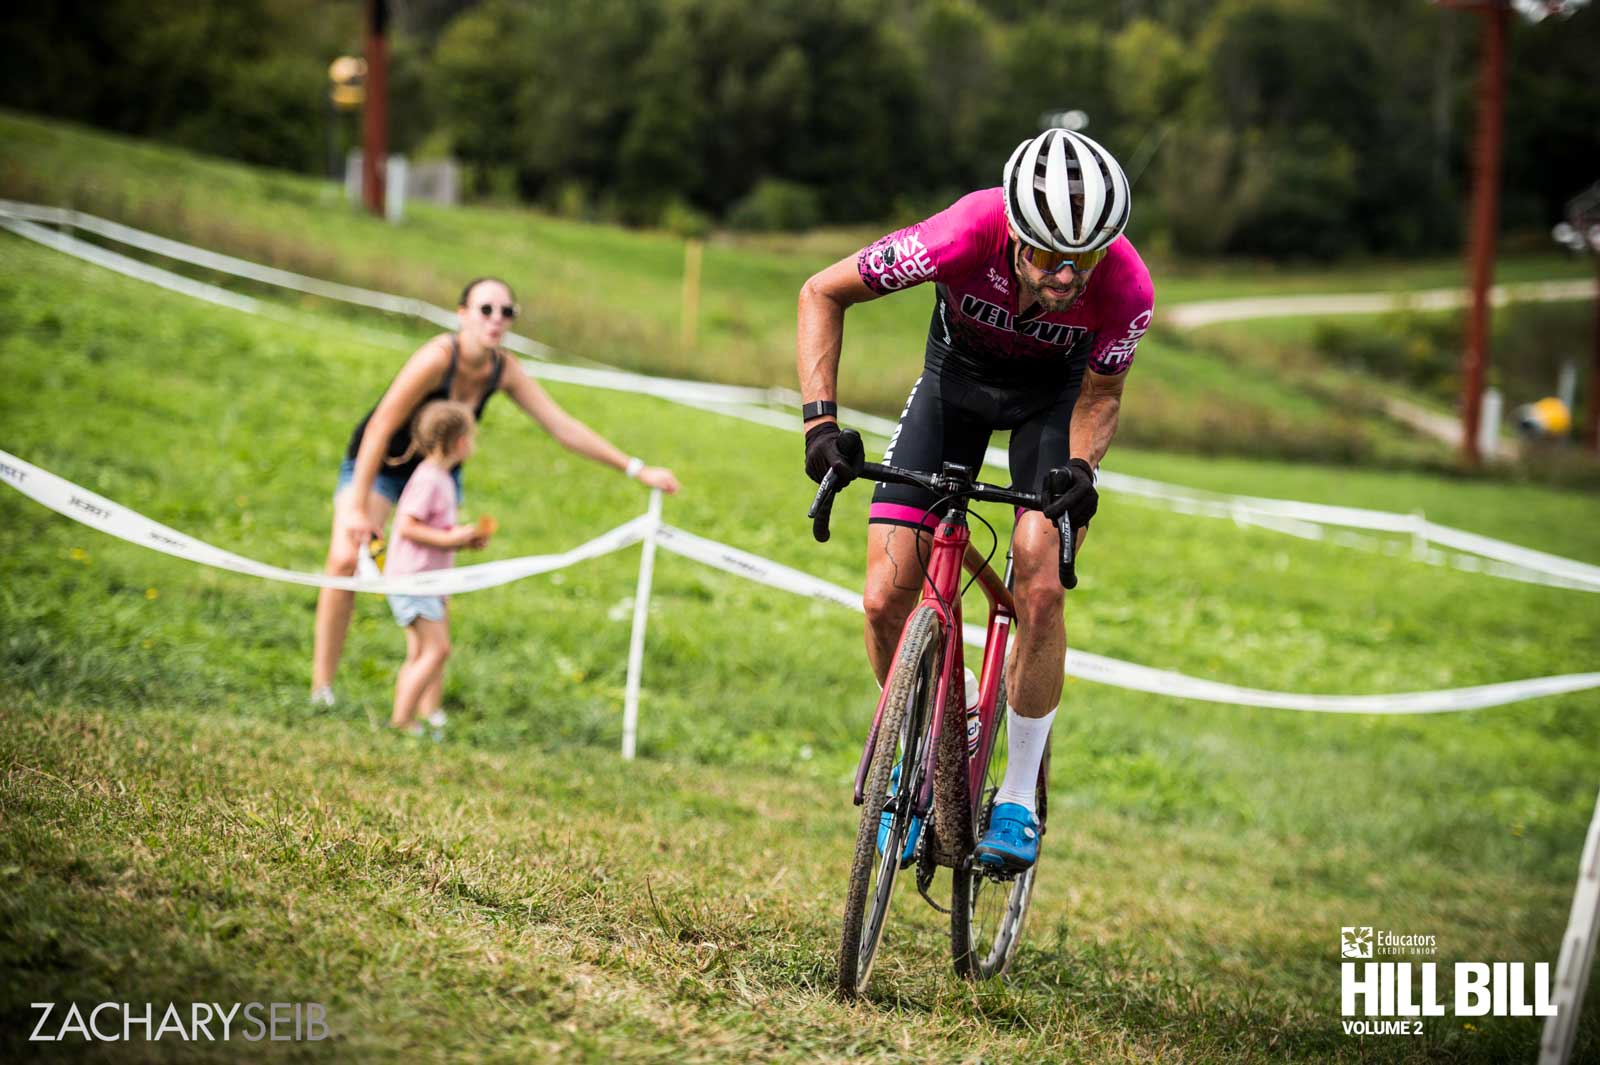 A cyclocross racer aggressively corners in front of fans.